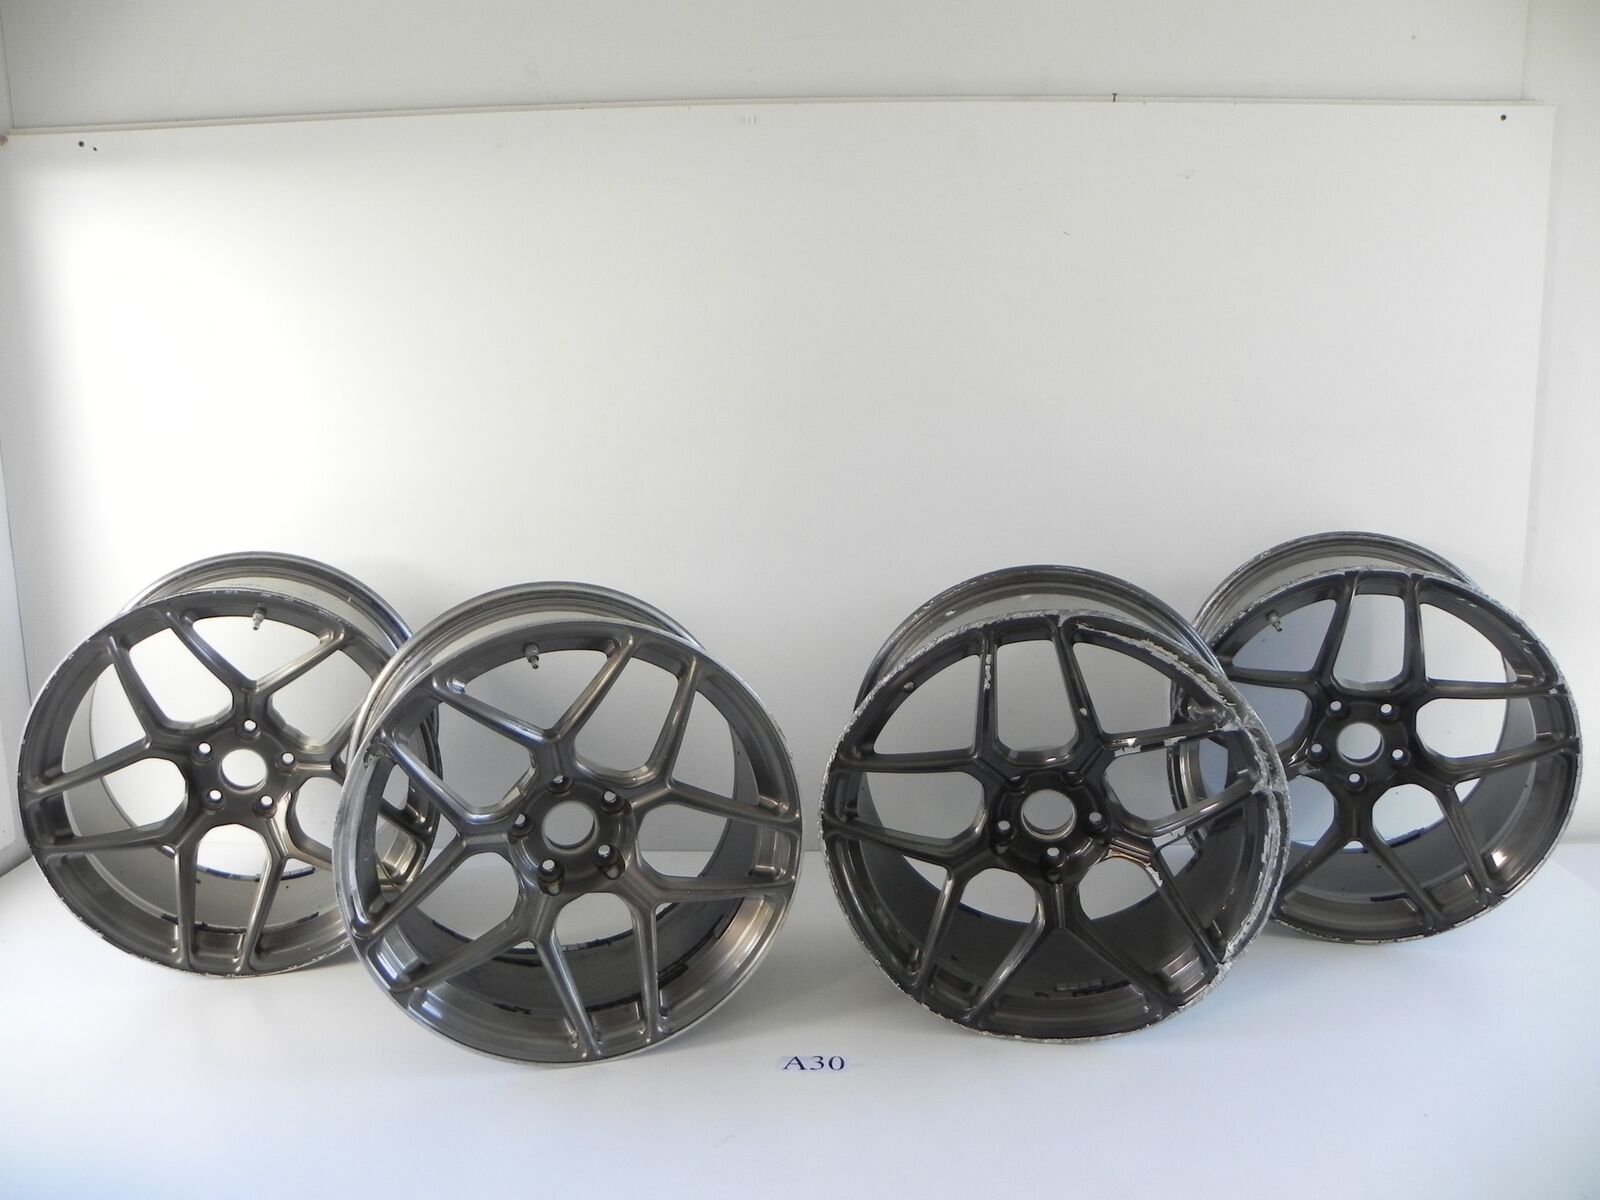 FRONT REAR PASSENGER & DRIVER SIDE WHEEL RIM SET BC FORGED 19 INCH OEM #30 A